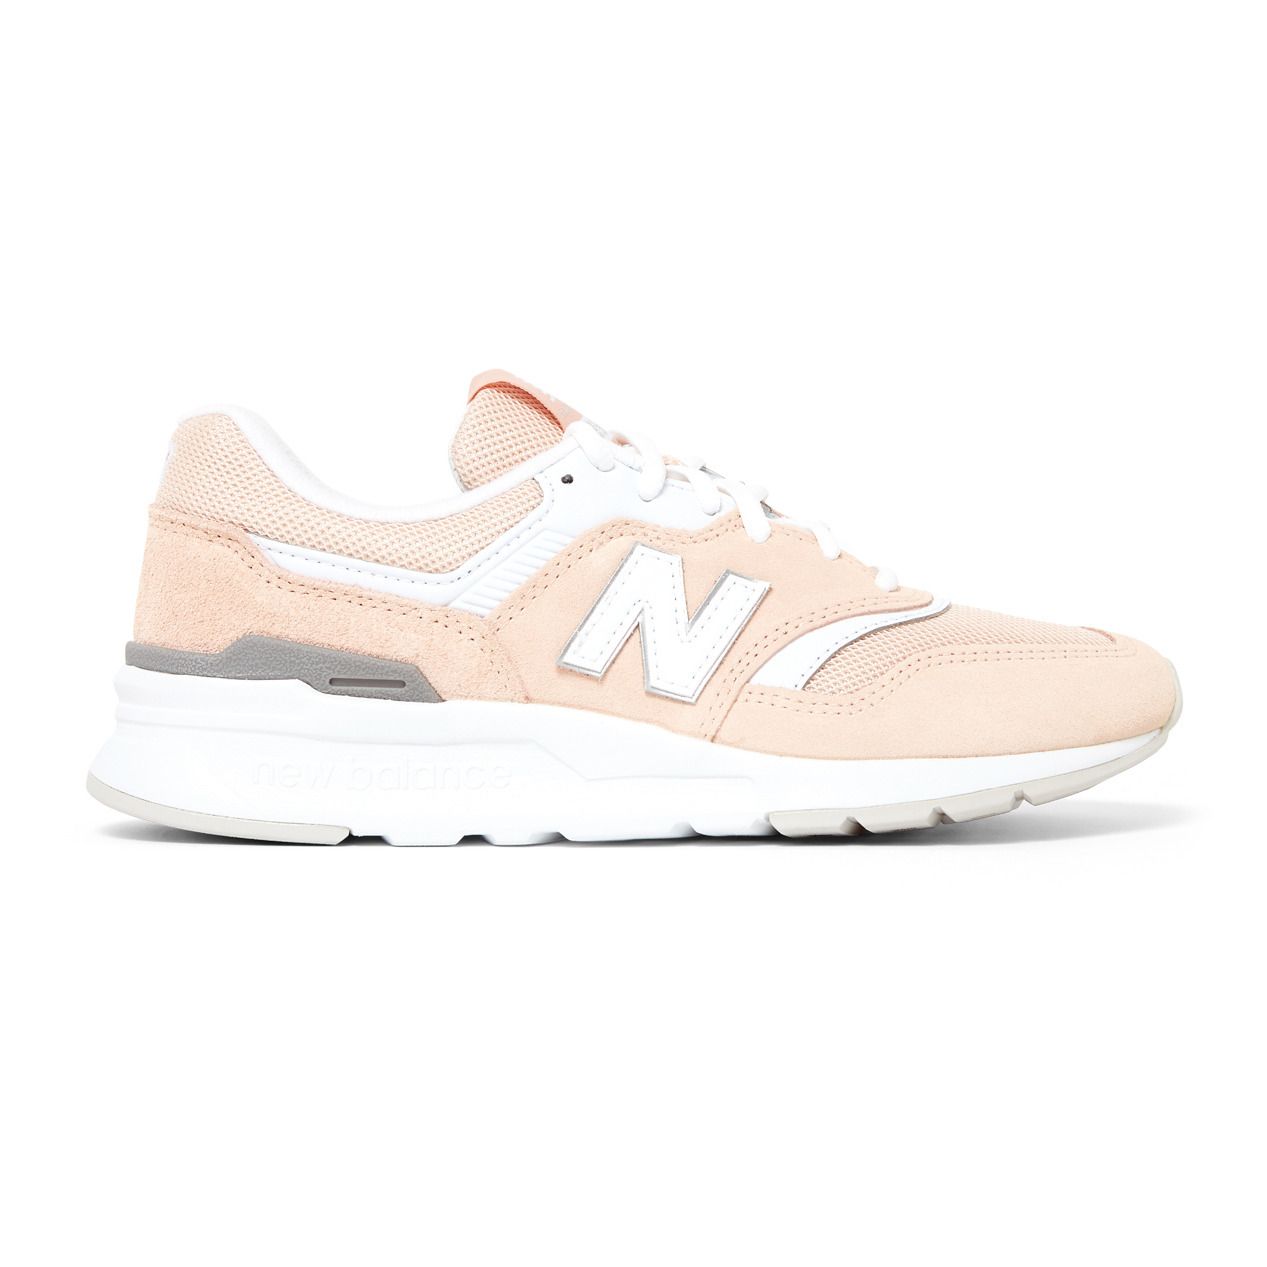 New Balance - Baskets 997 - Collection Adulte - - Femme - Rose